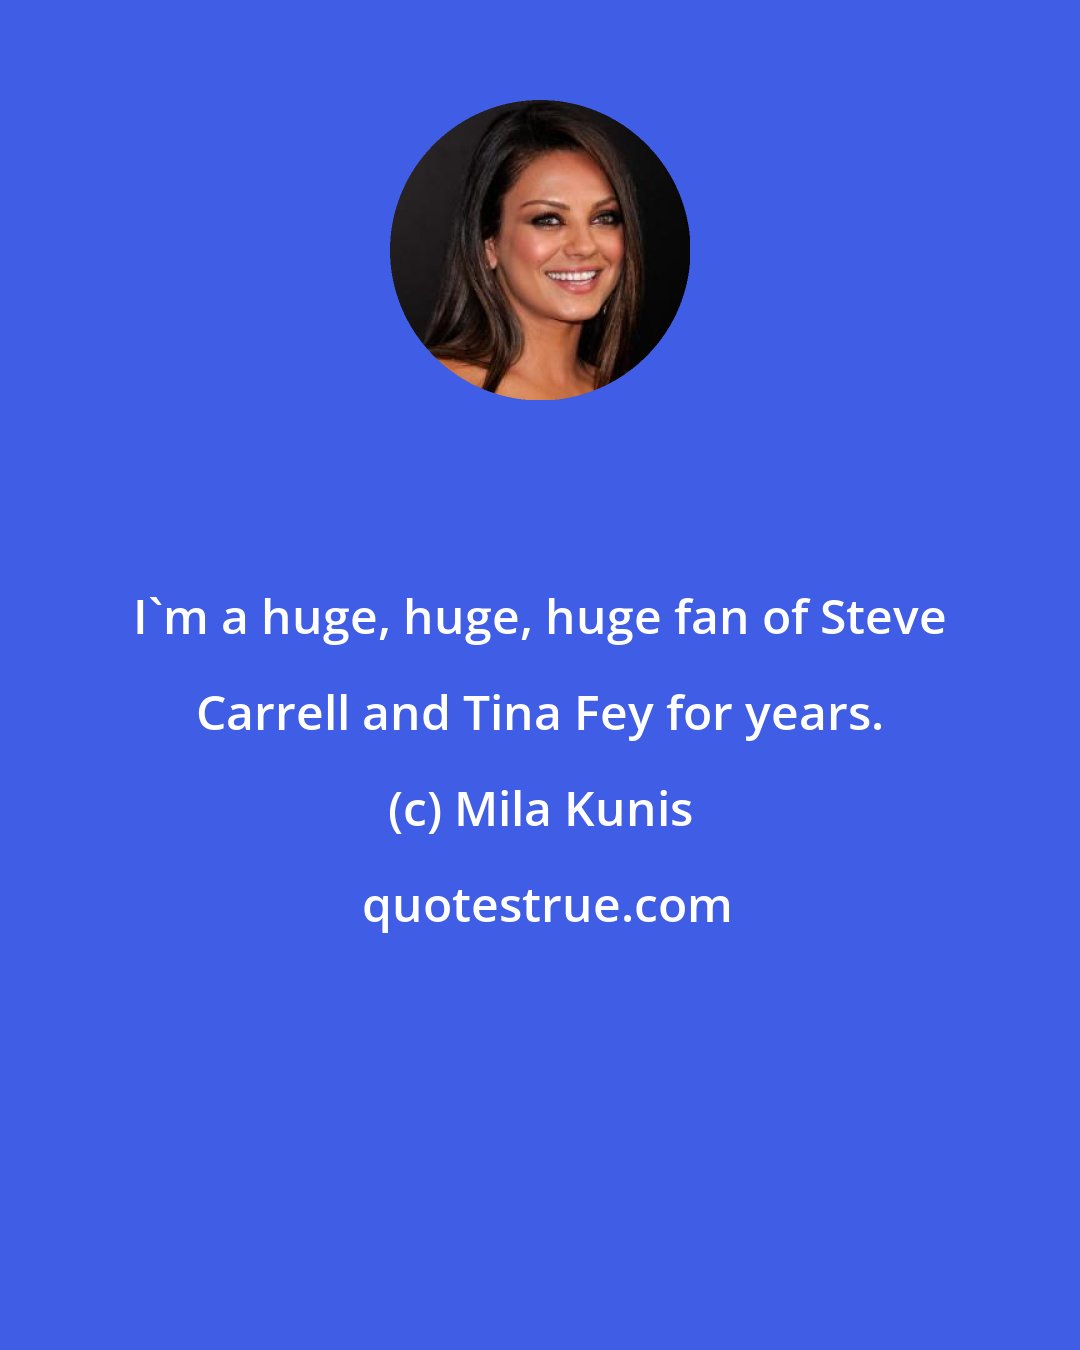 Mila Kunis: I'm a huge, huge, huge fan of Steve Carrell and Tina Fey for years.